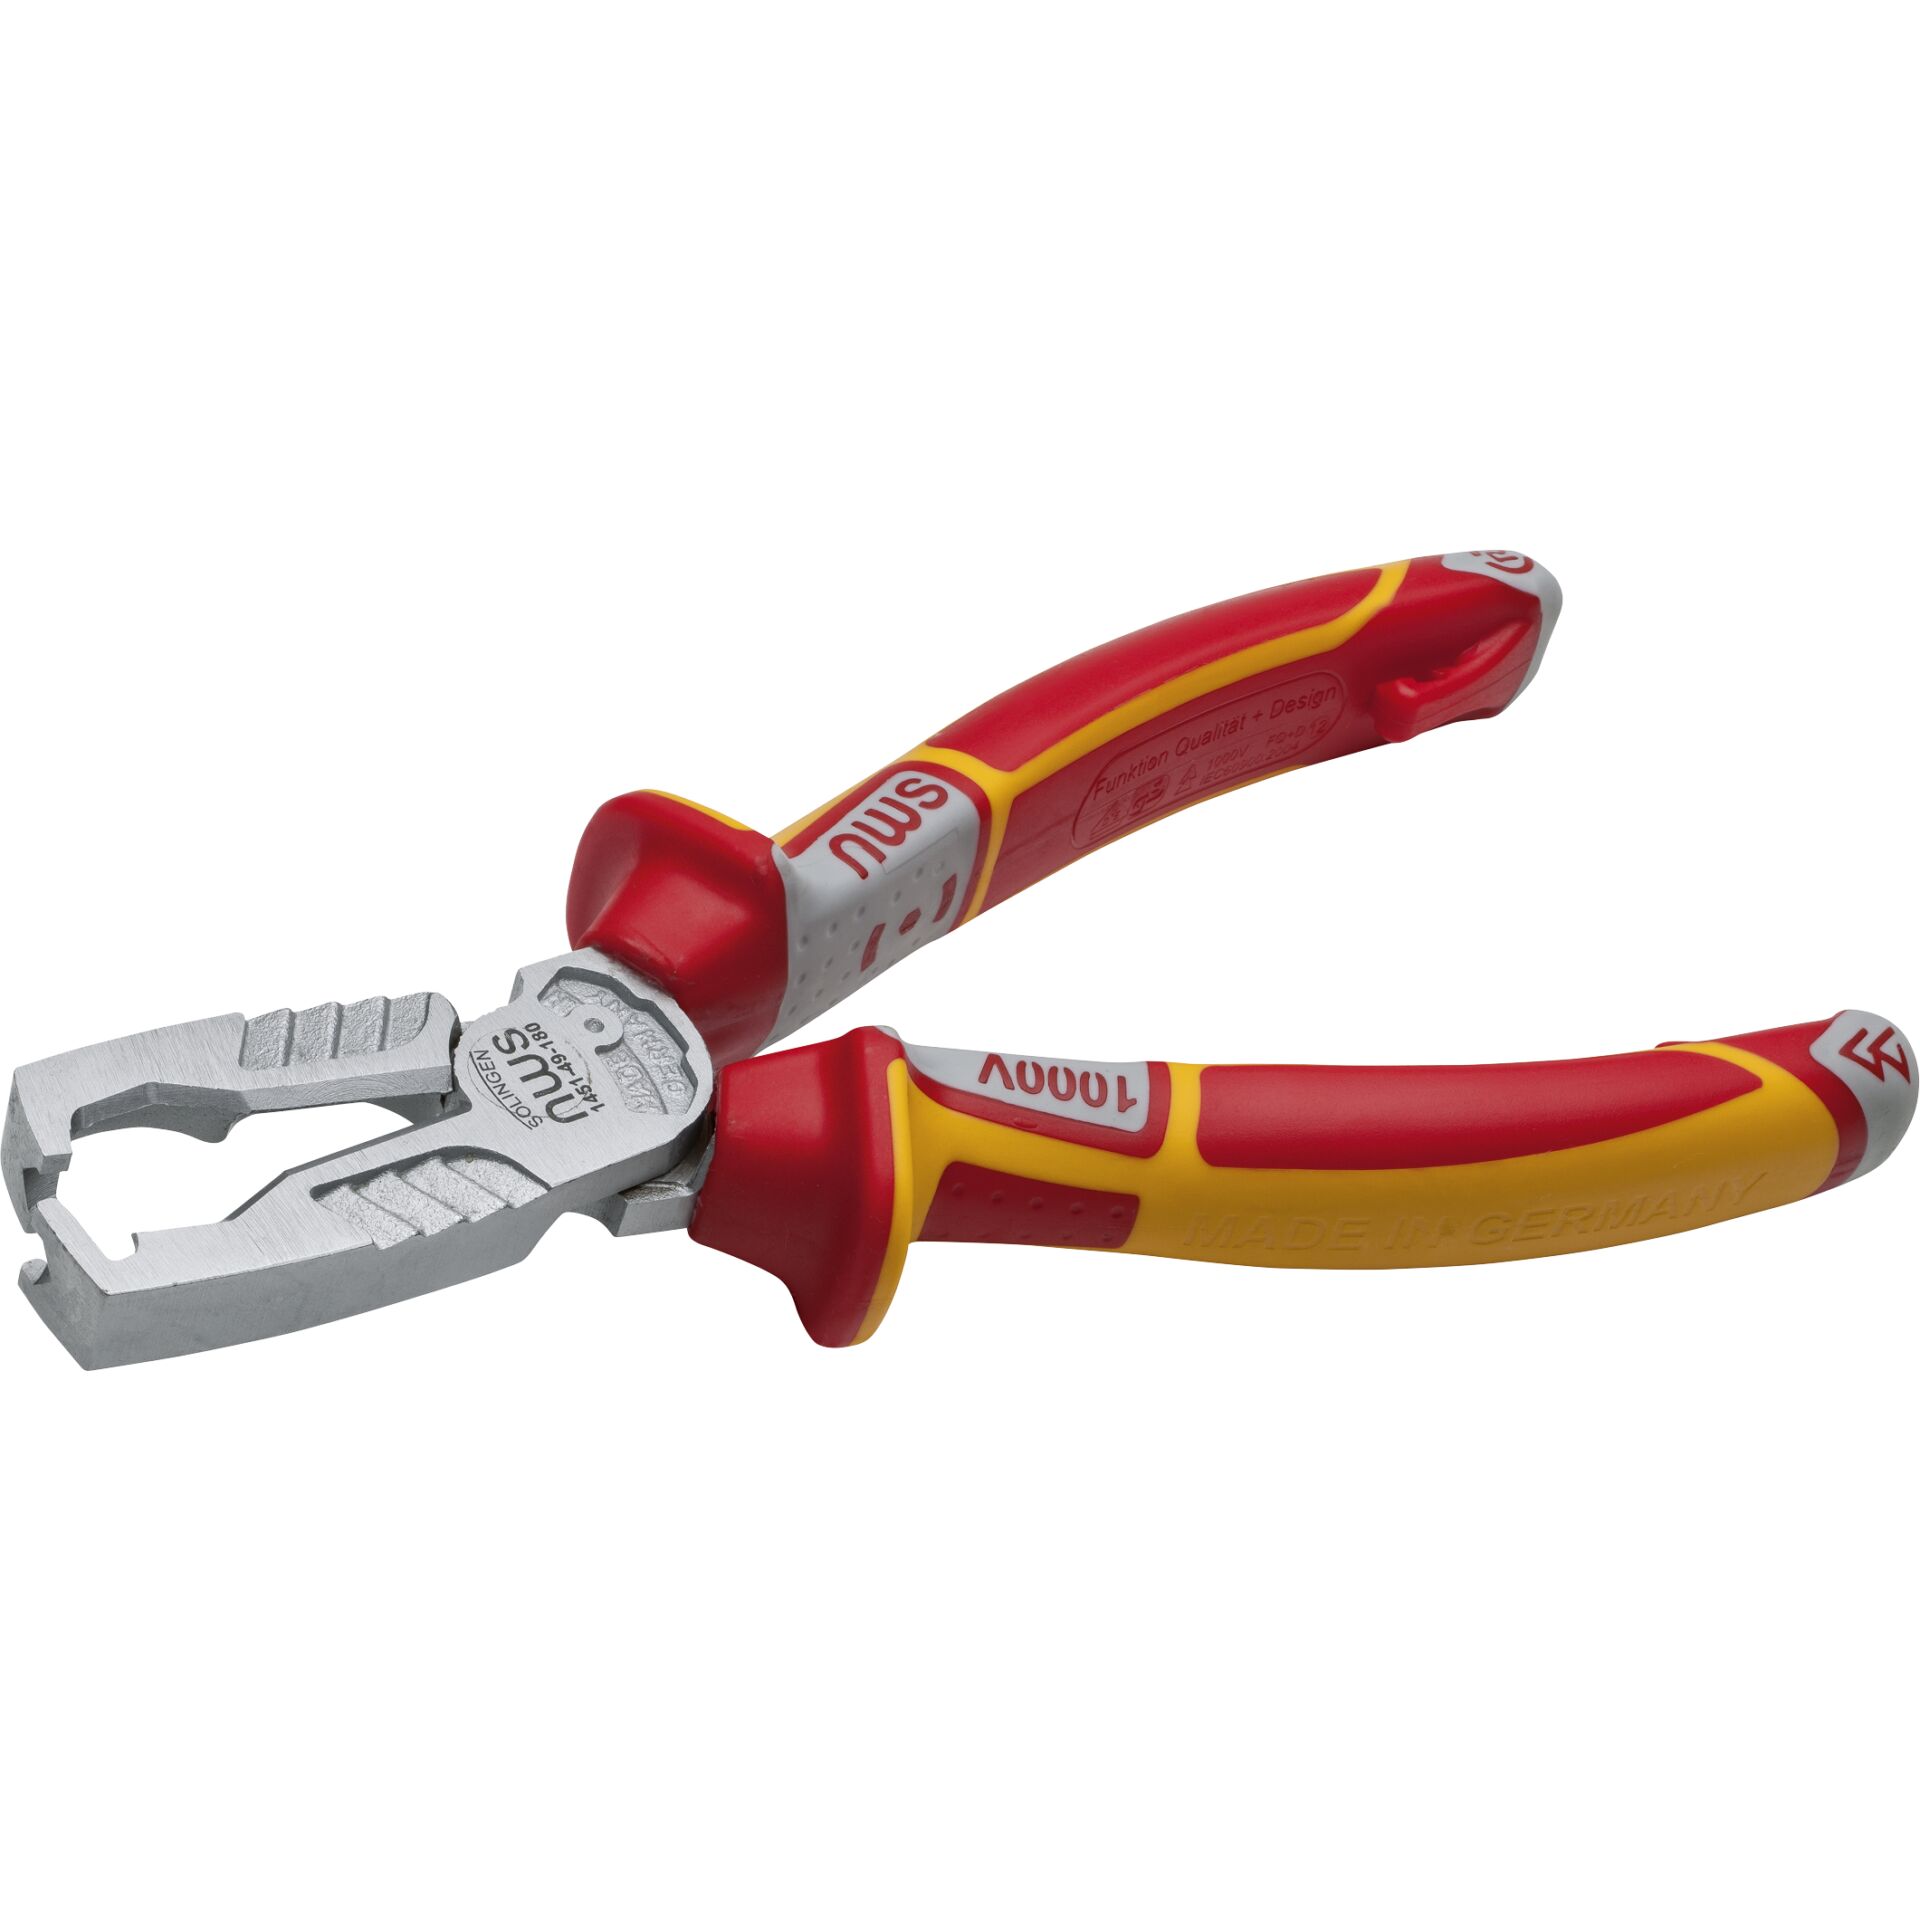 NWS Multifunctional Wire Stripping Pliers MultiCutter